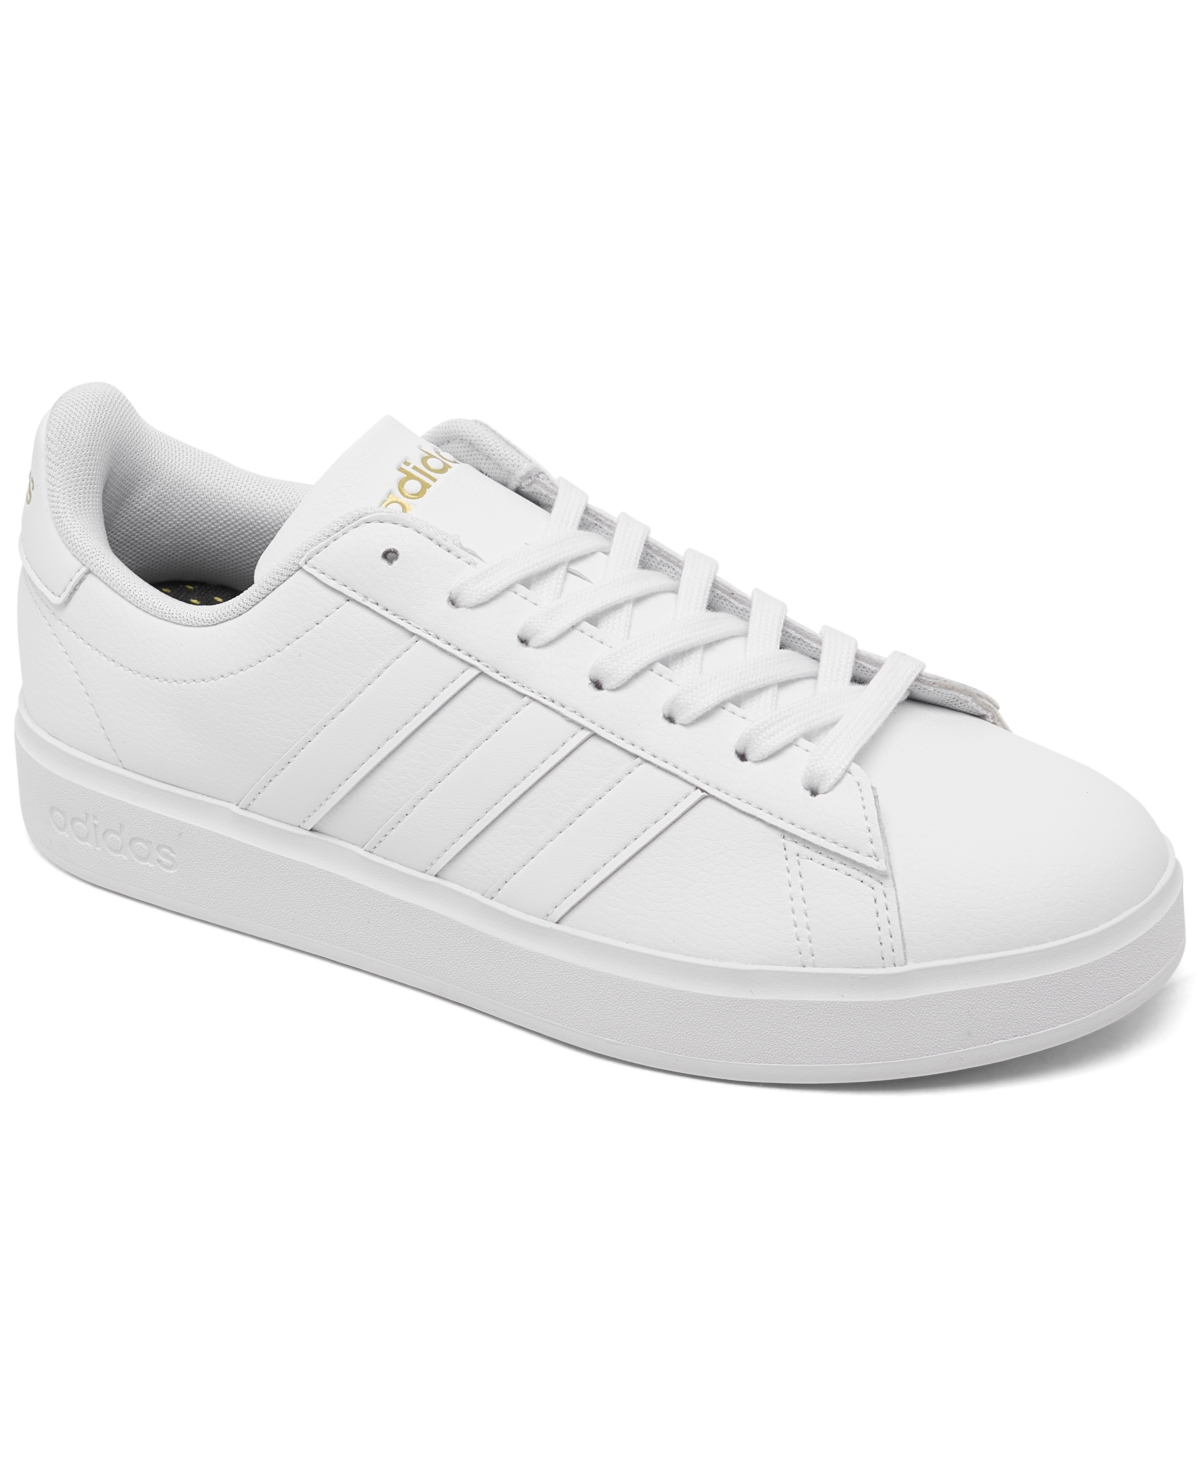 ADIDAS ORIGINALS WOMEN'S GRAND COURT CLOUDFOAM LIFESTYLE CASUAL SNEAKERS FROM FINISH LINE